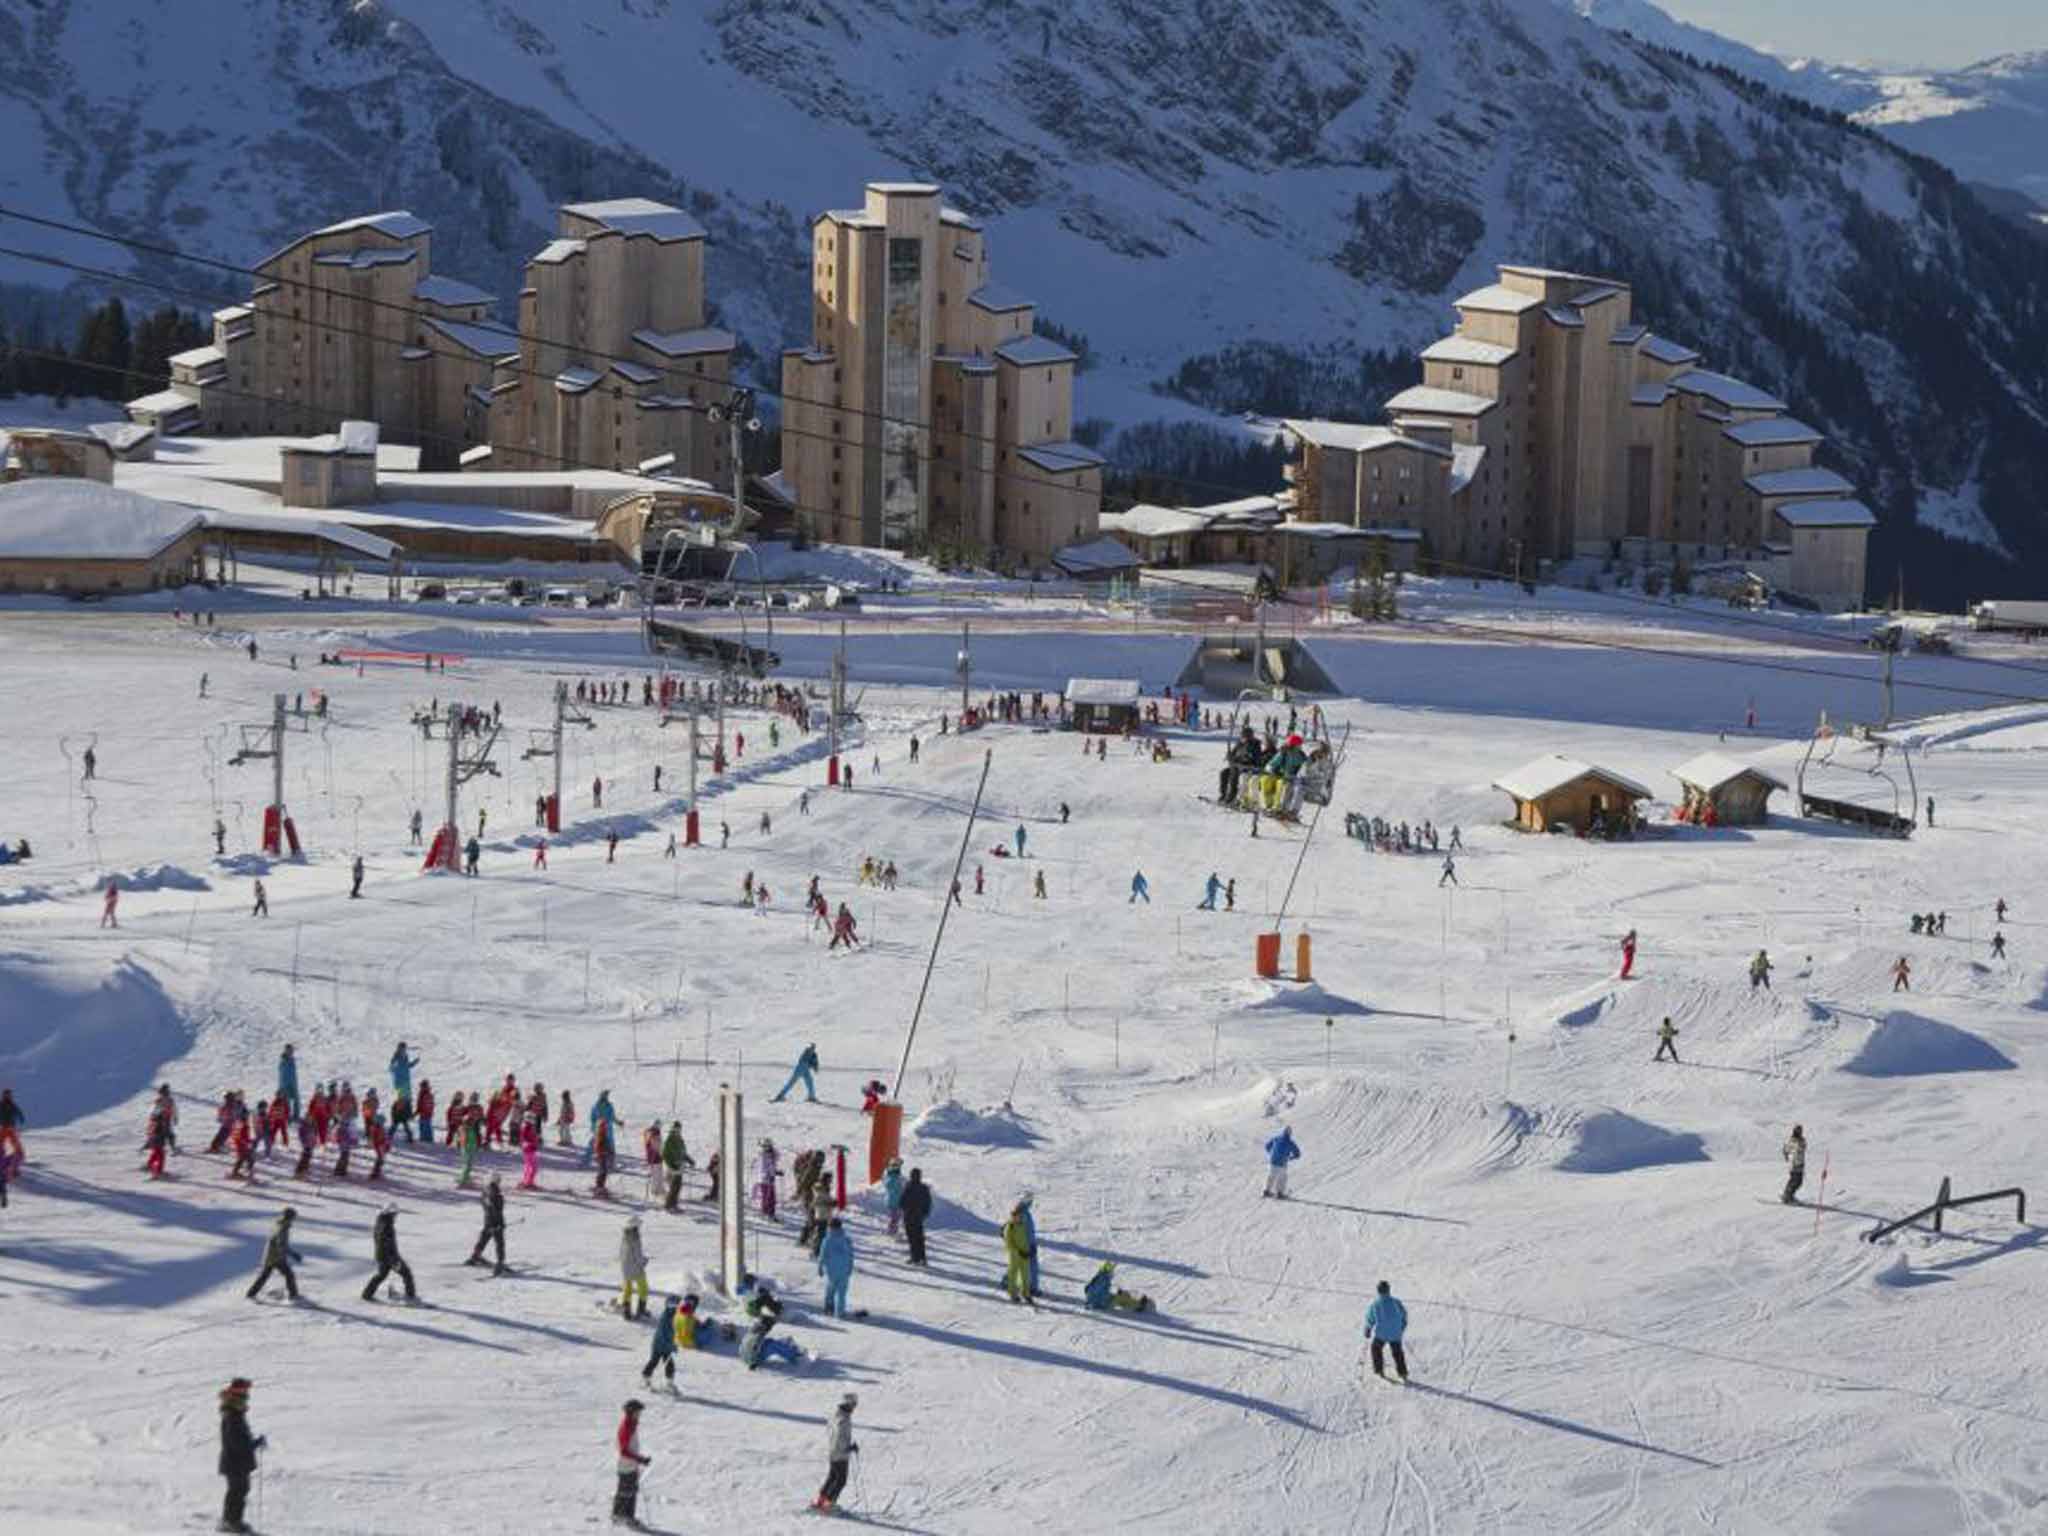 Avoriaz in the French Alps, where more snow is expected